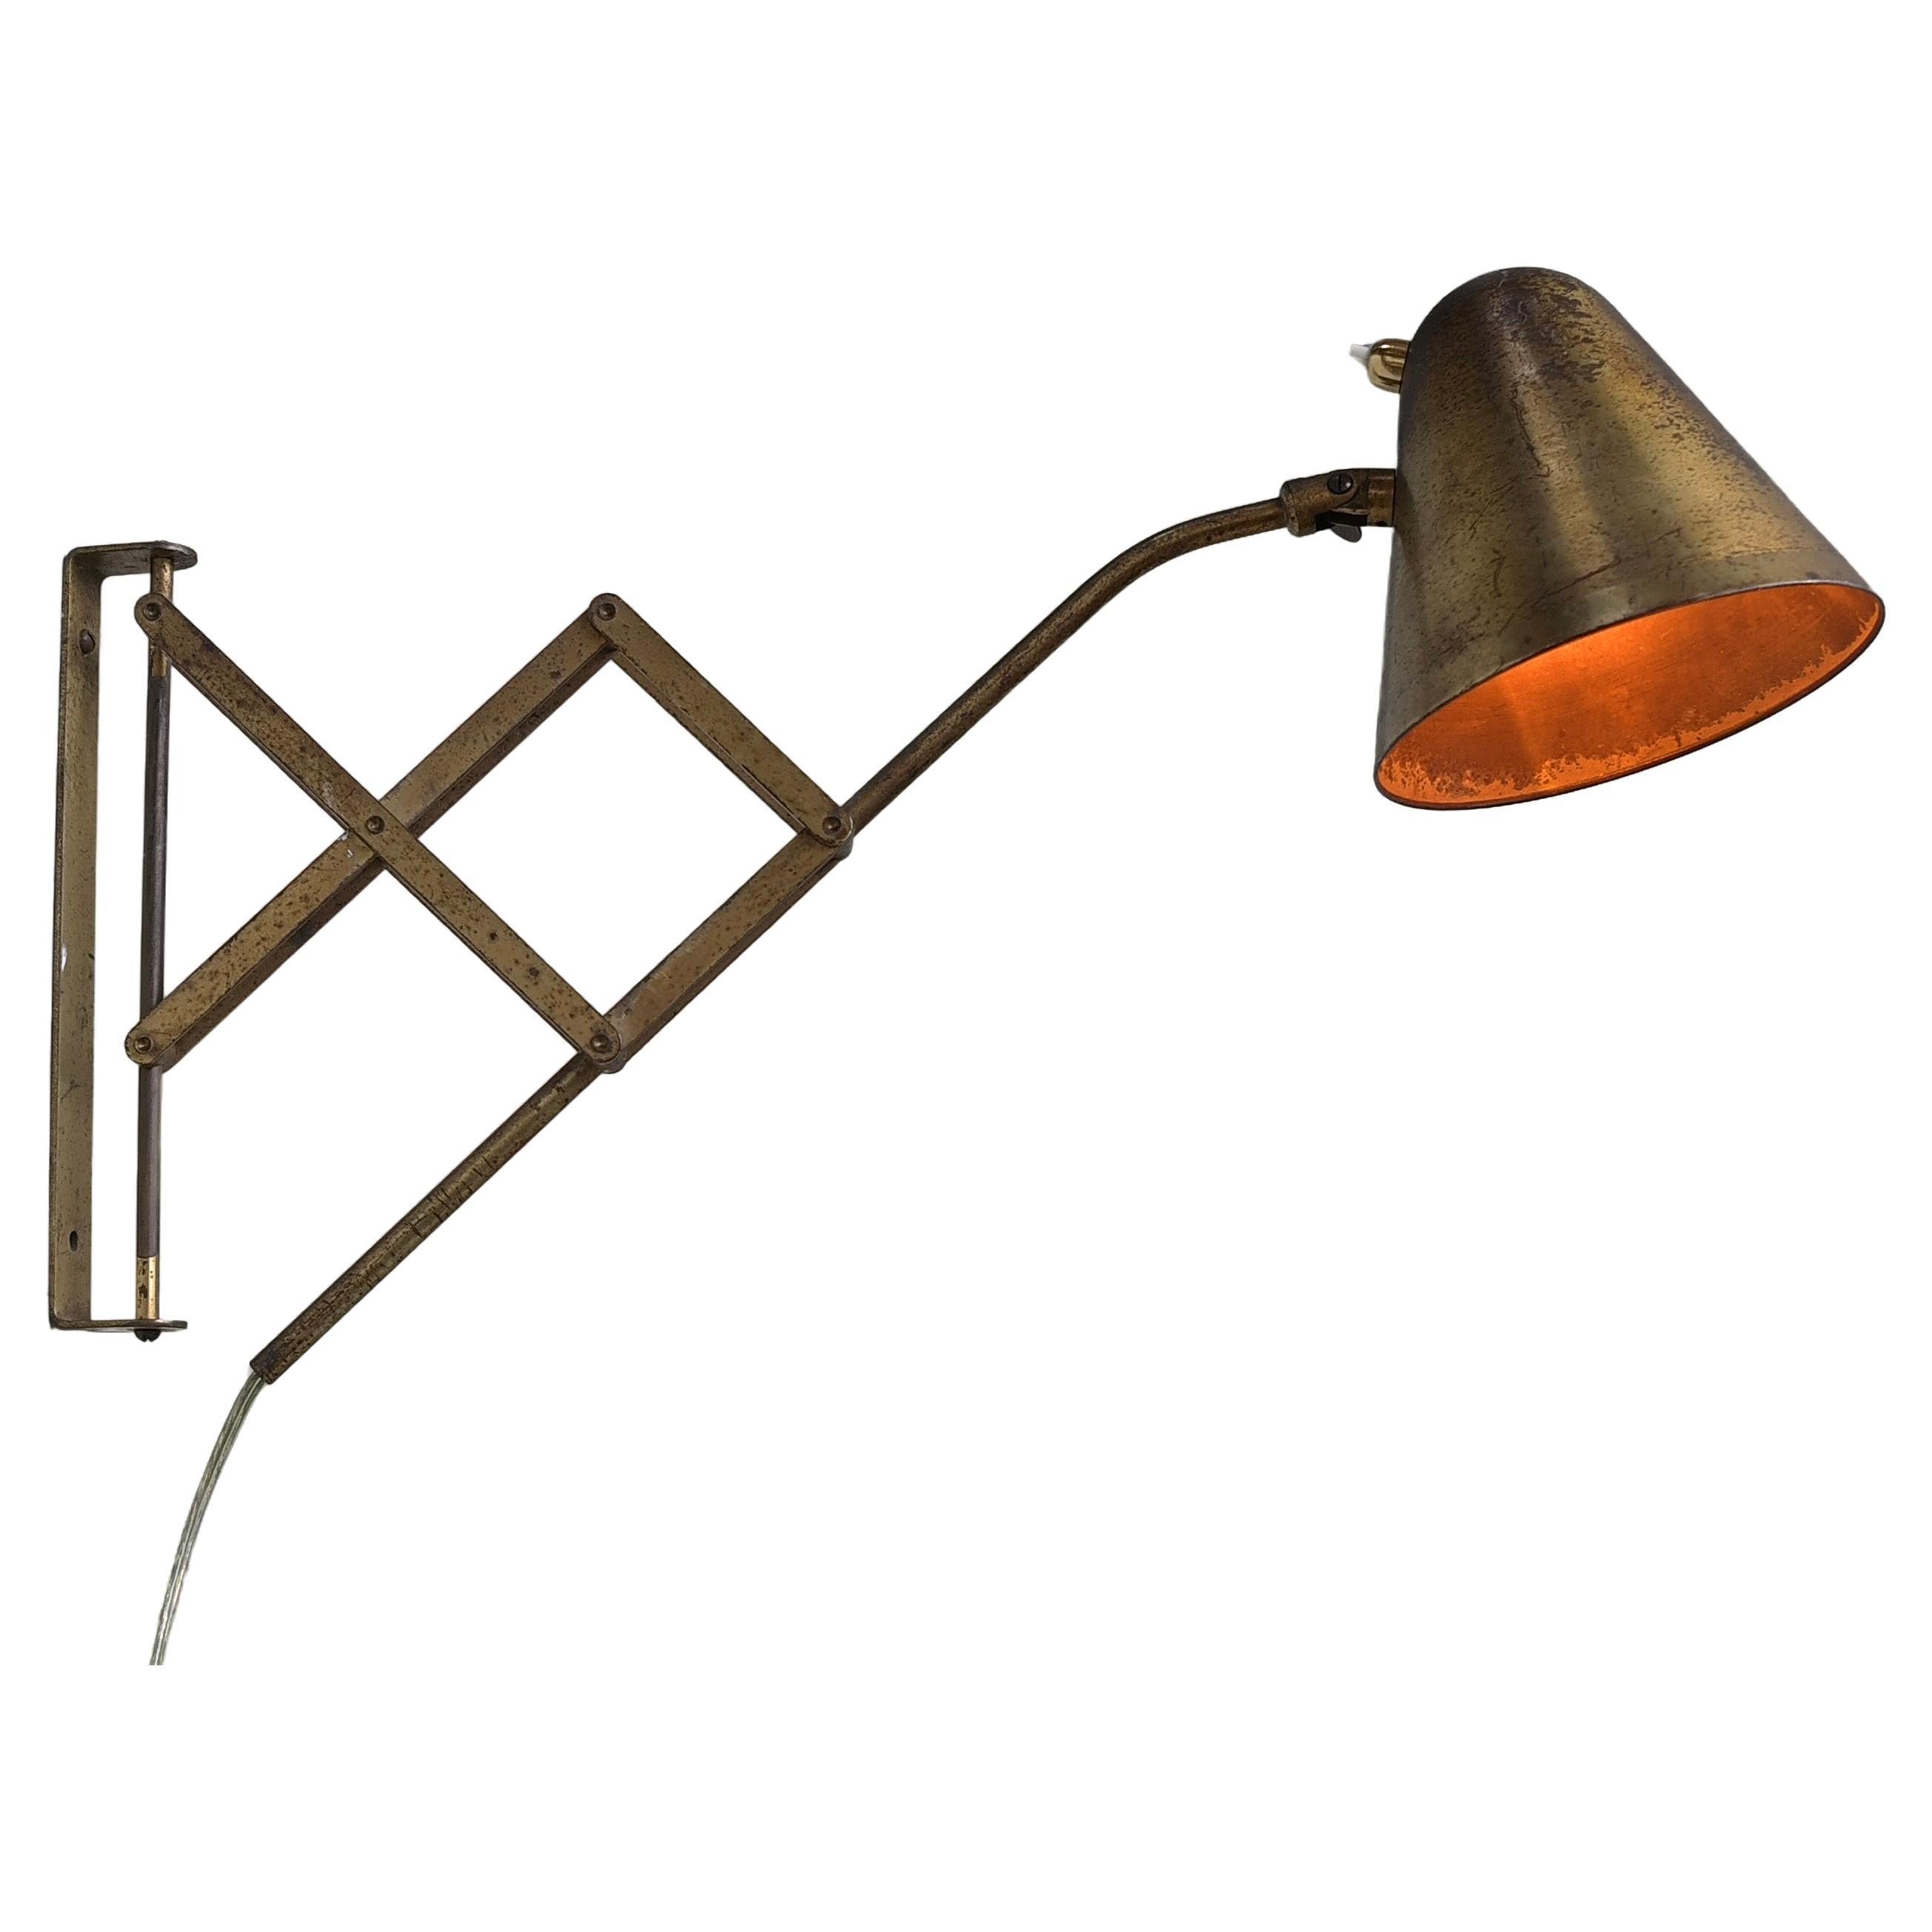 Th. Valentiner by Poul Dinesen Copper Scissor Wall Lamp, Denmark 1950s For Sale